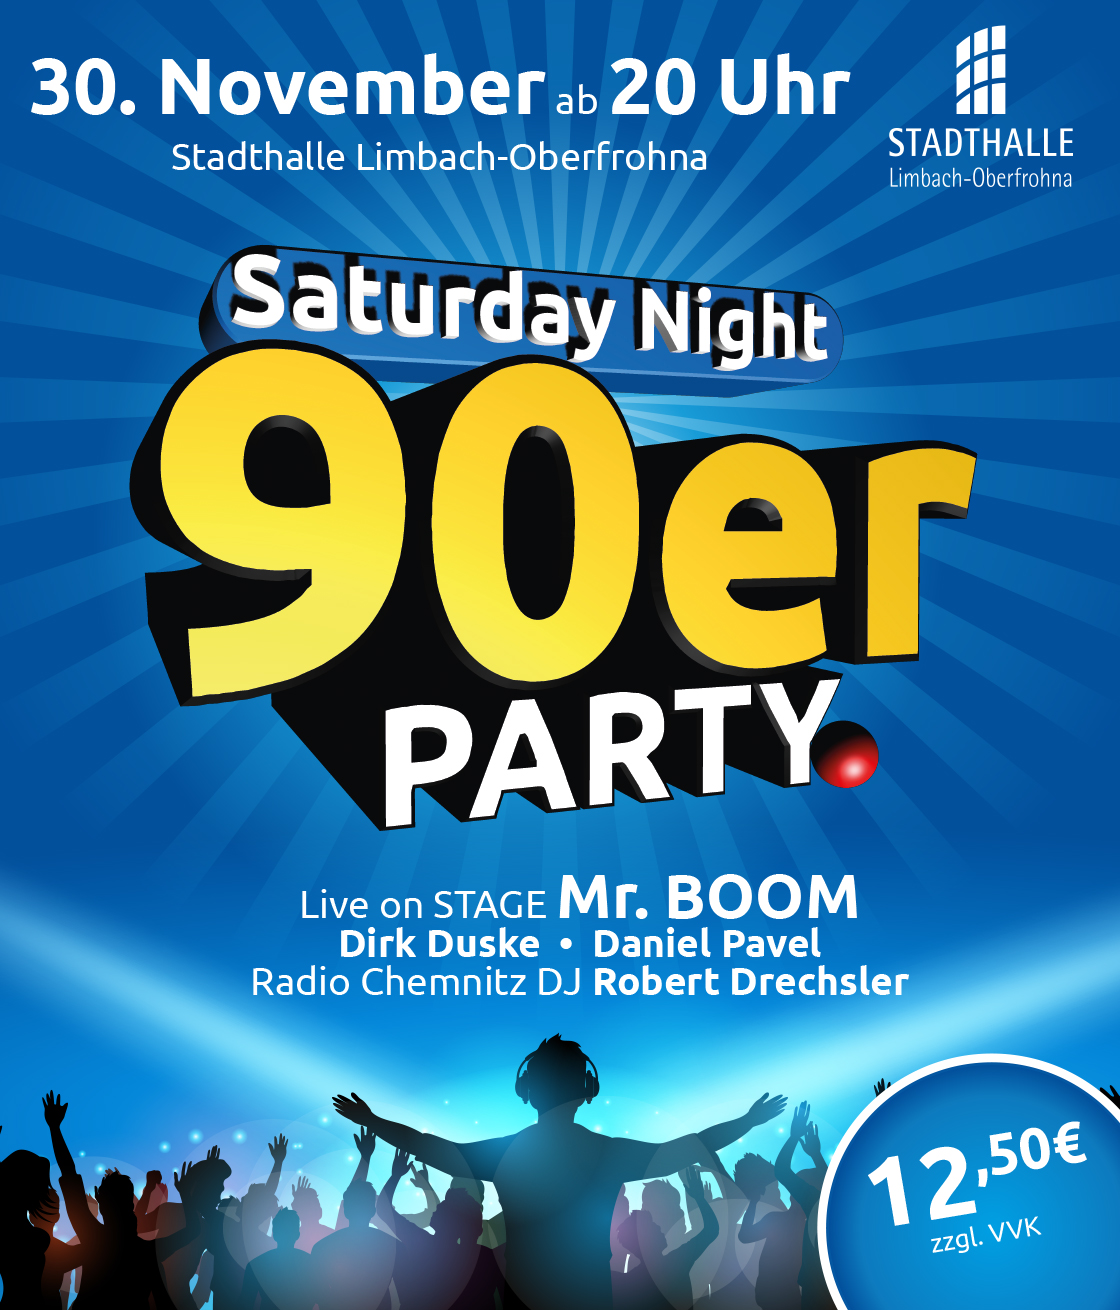 Saturday Night -DIE 90er Party in Limbach-Oberfrohna!-